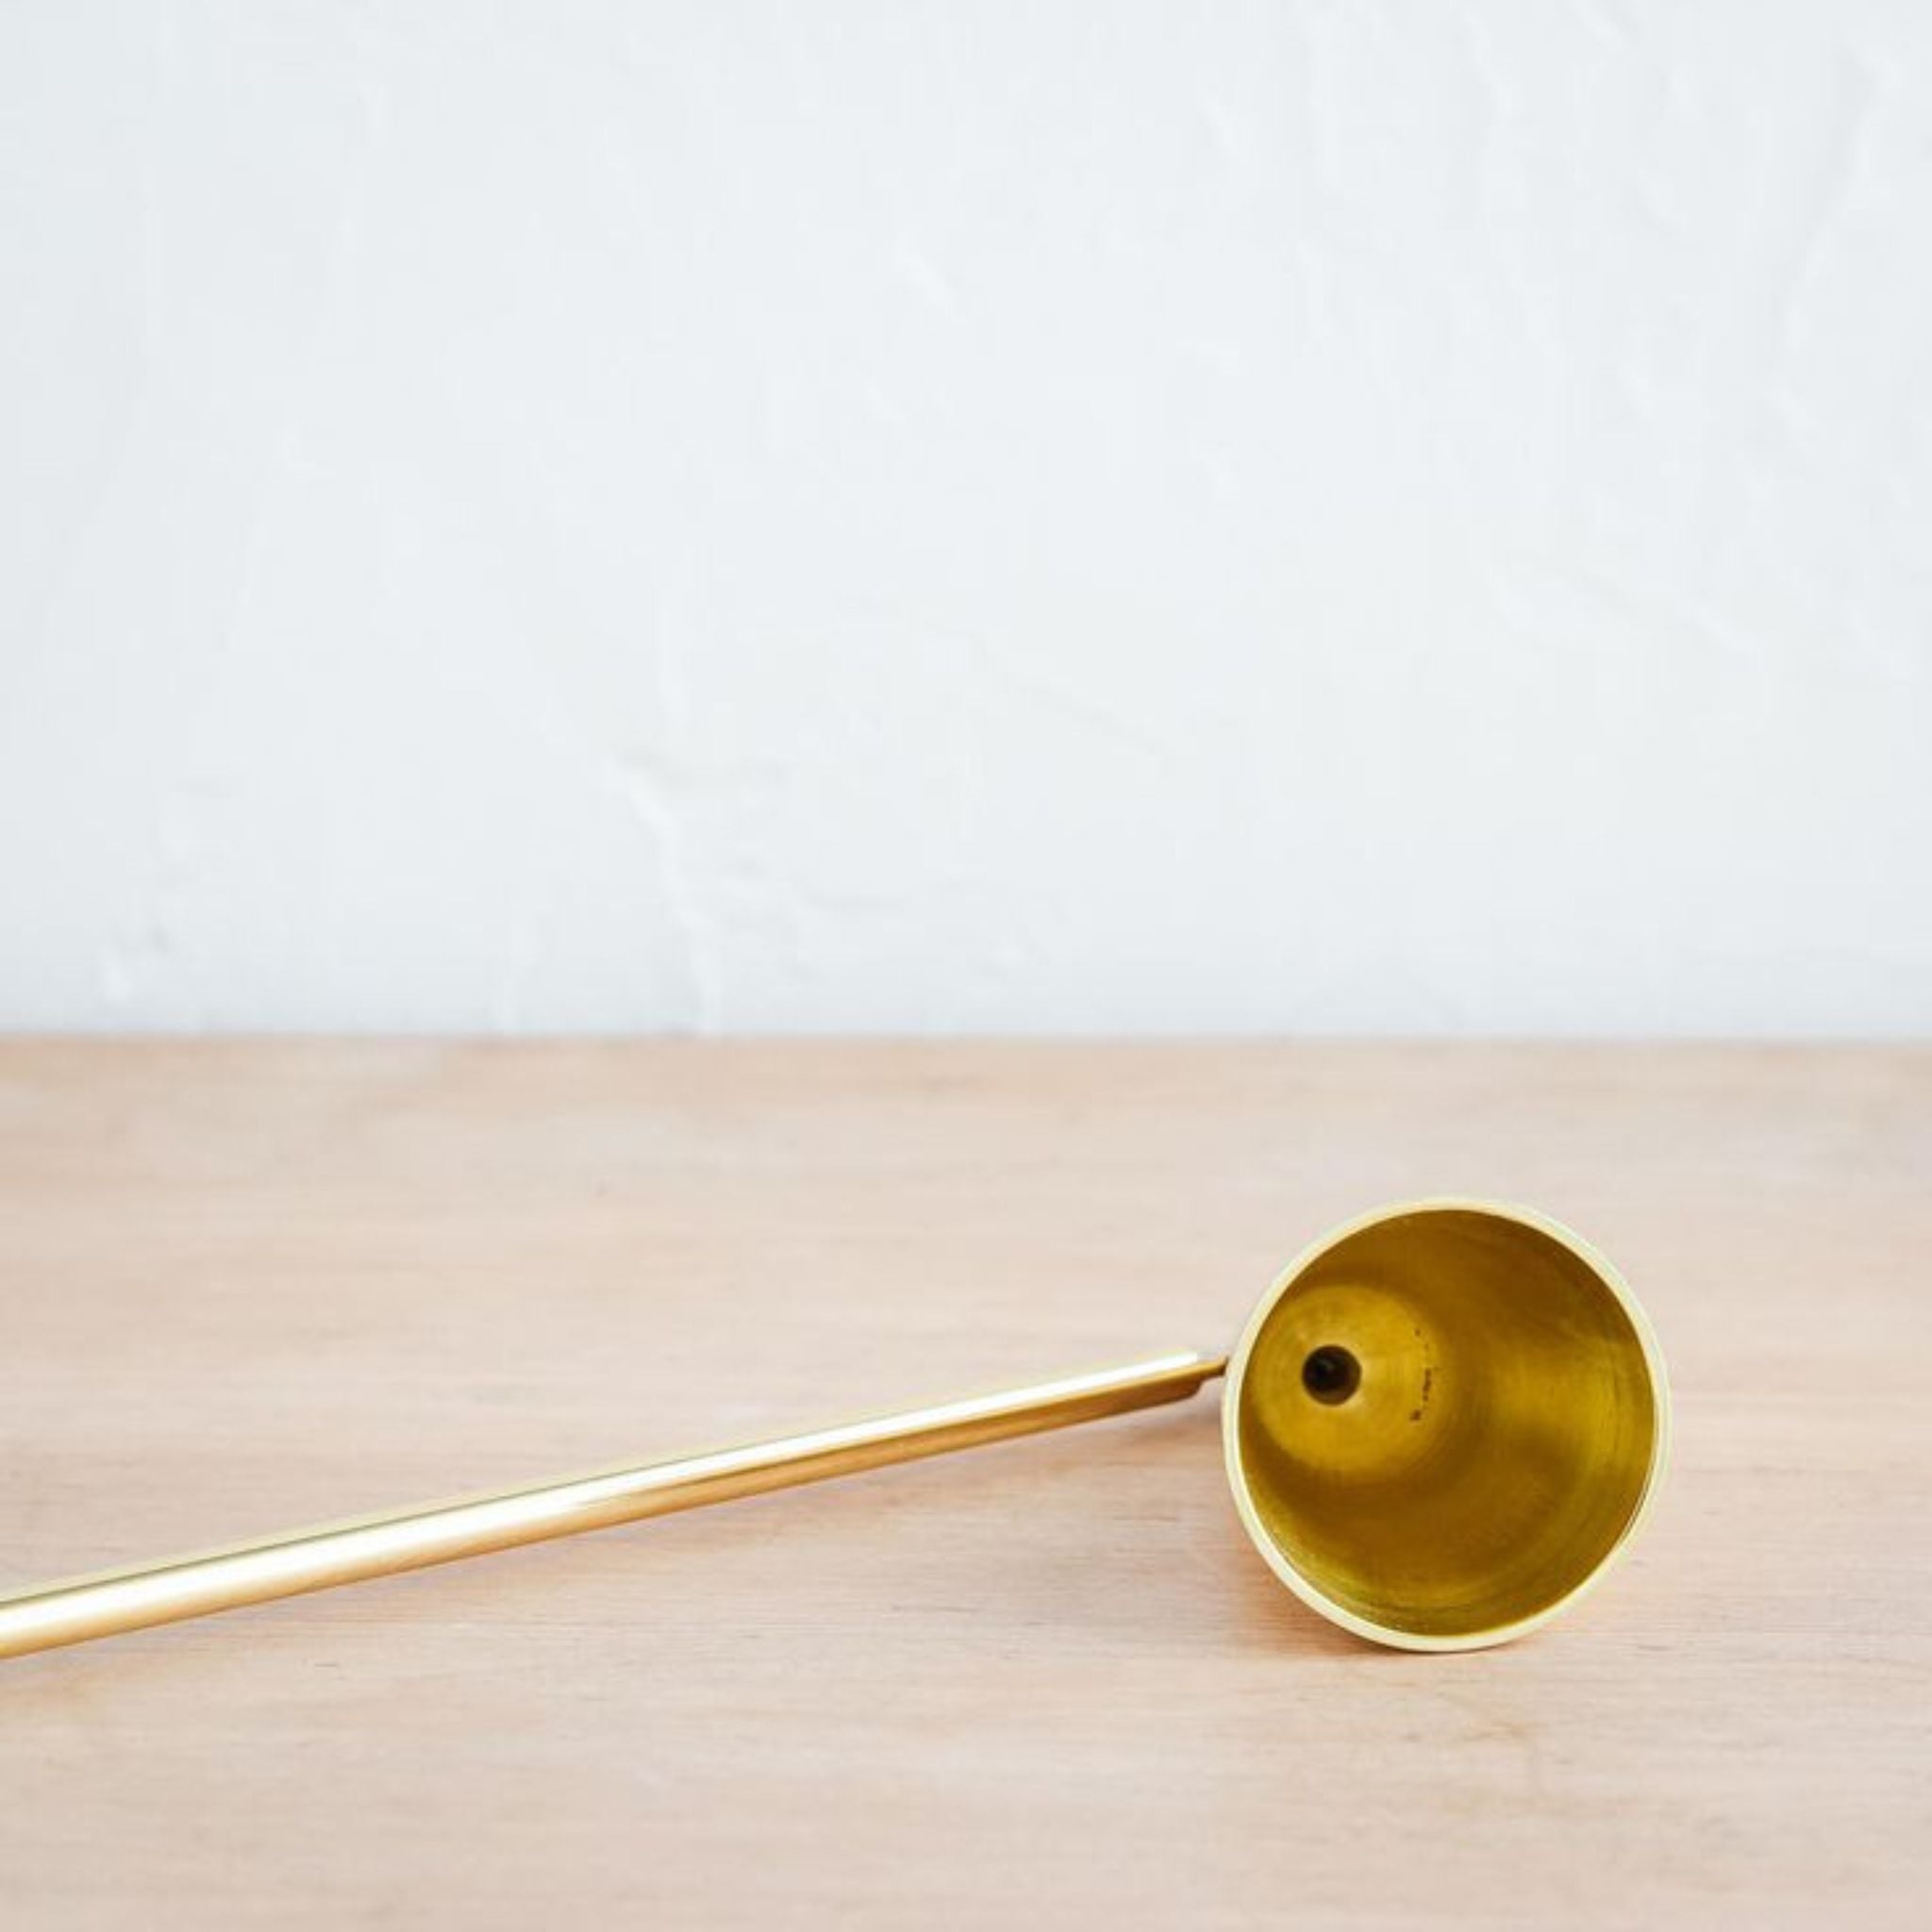 SIMPLY ELEVATED - Our Modernist Candle Douter is an elemental tool, designed to extinguish a flame without risk of spattered wax. As clean in line as it is in purpose, the solid brass construction in hinged at the cone for easy use from any height or angle. Save your breath, and let the douter do.